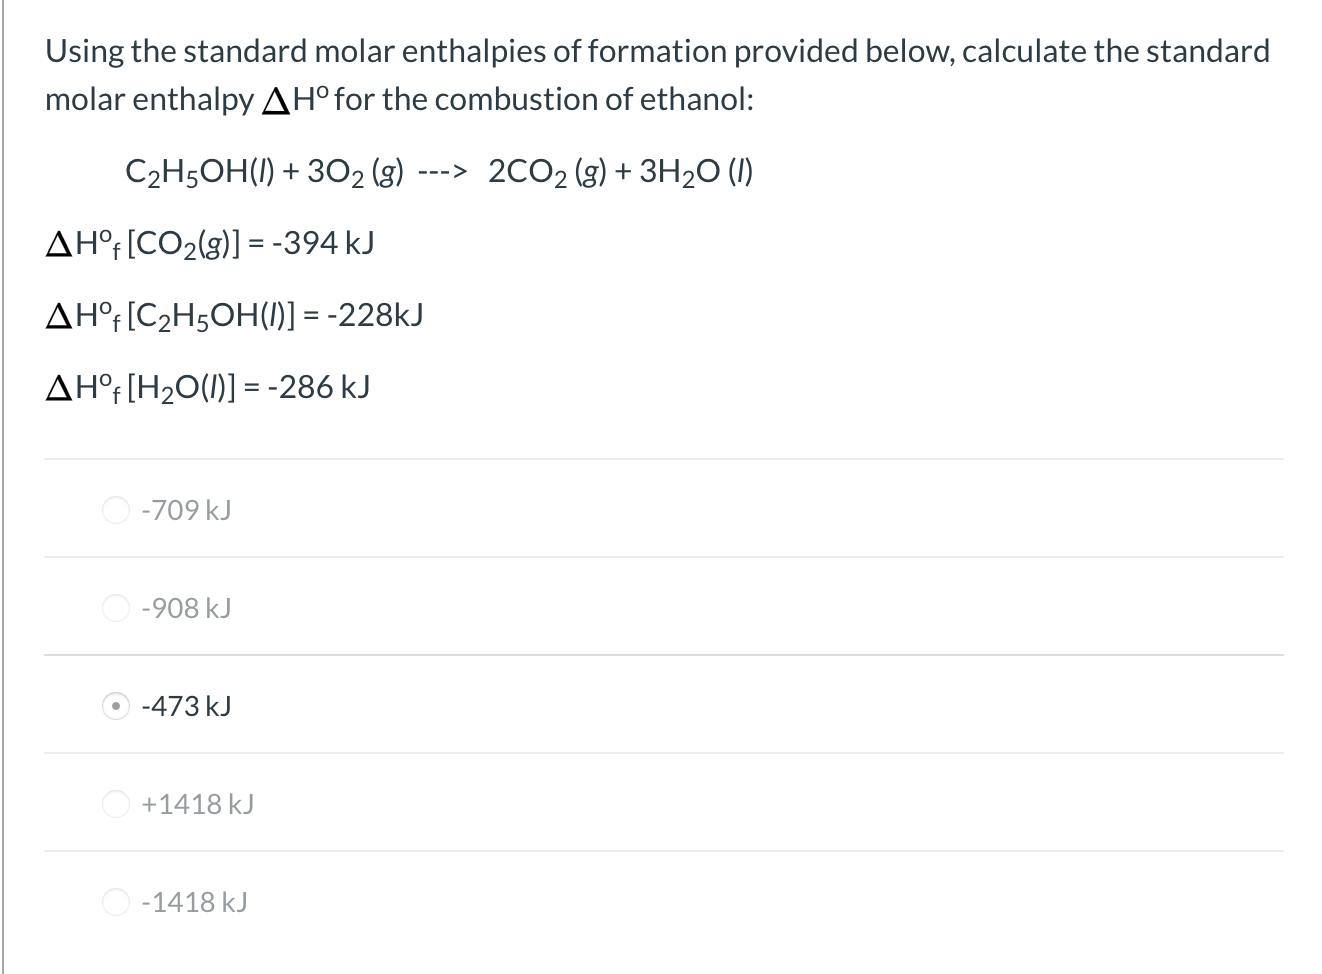 Using the standard molar enthalpies of formation provided below, calculate the standard
molar enthalpy AH°for the combustion of ethanol:
C2H5OH(1) + 302 (g)
2CO2 (g) + 3H2O (1)
--->
AH°[CO2(g)] = -394 kJ
AH°r[C2H5OH(1)] = -228KJ
AH°f[H2O(1)] = -286 kJ
O -709 kJ
O -908 kJ
O -473 kJ
O +1418 kJ
O -1418 kJ
